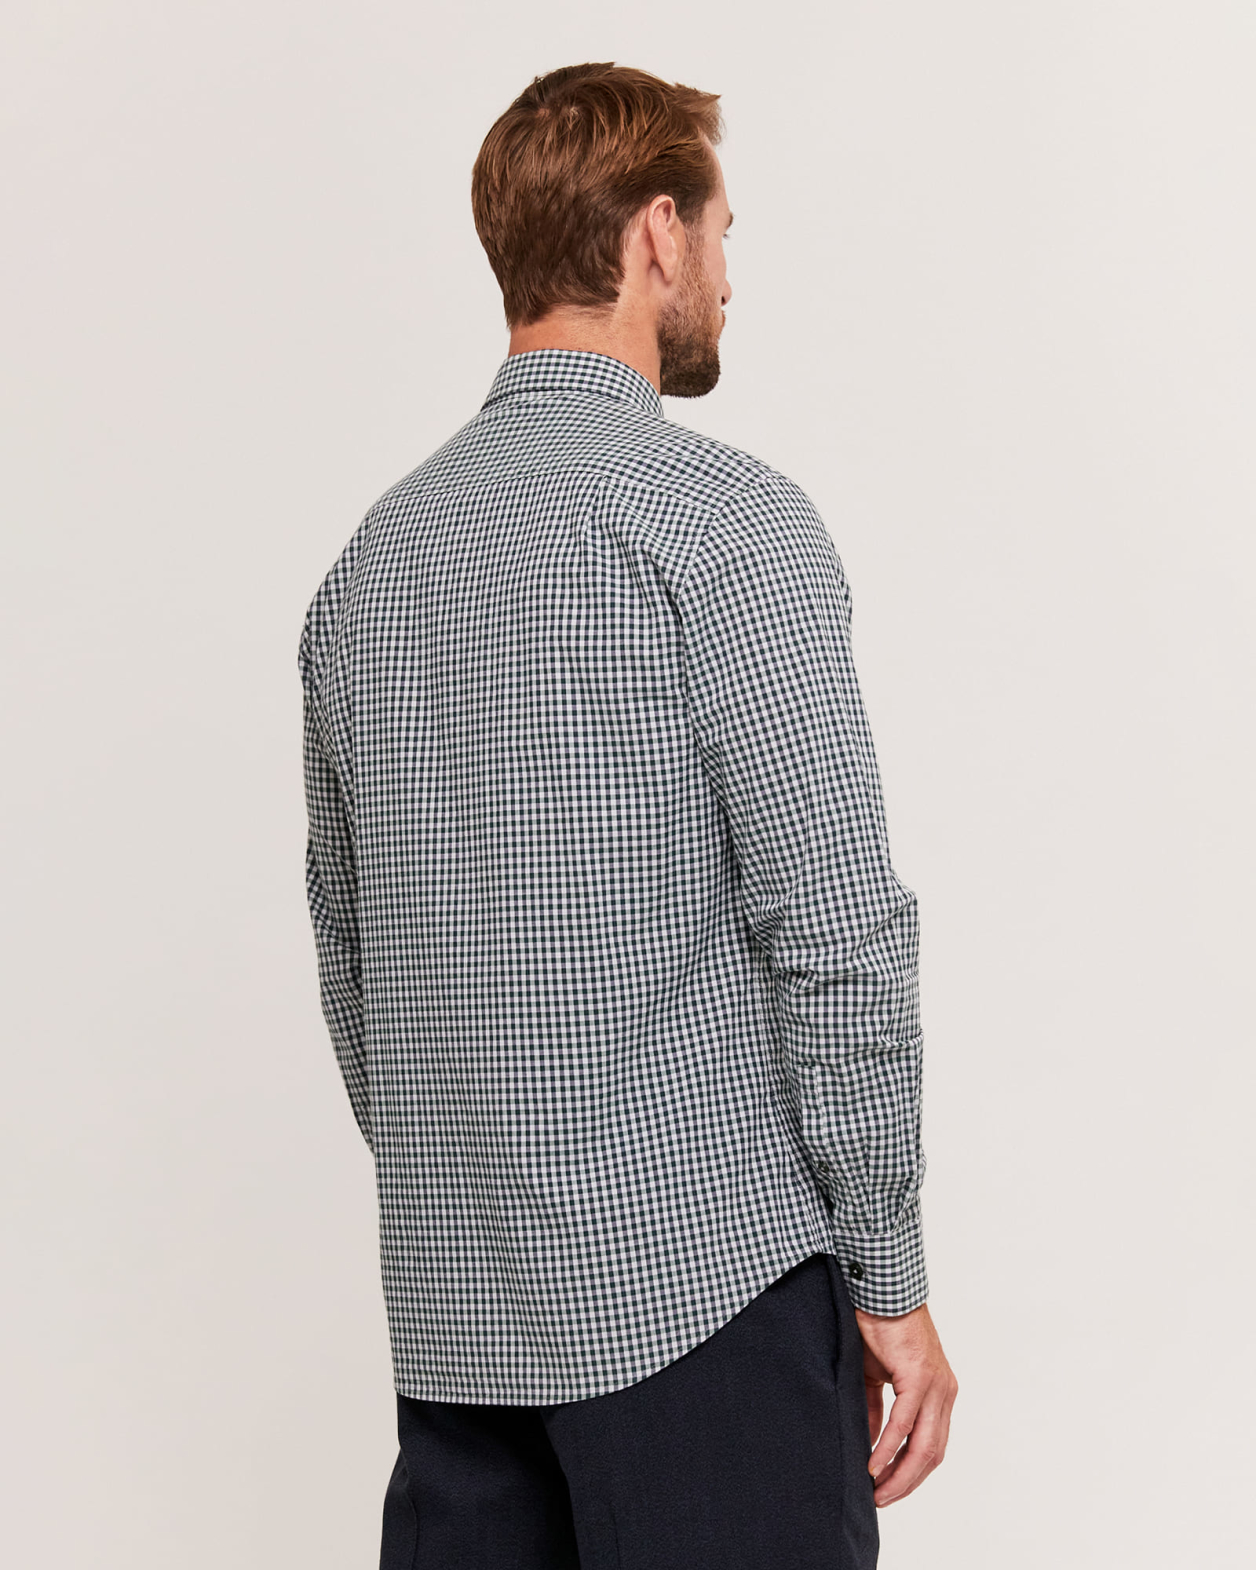 Phillip Check Shirt in GREEN